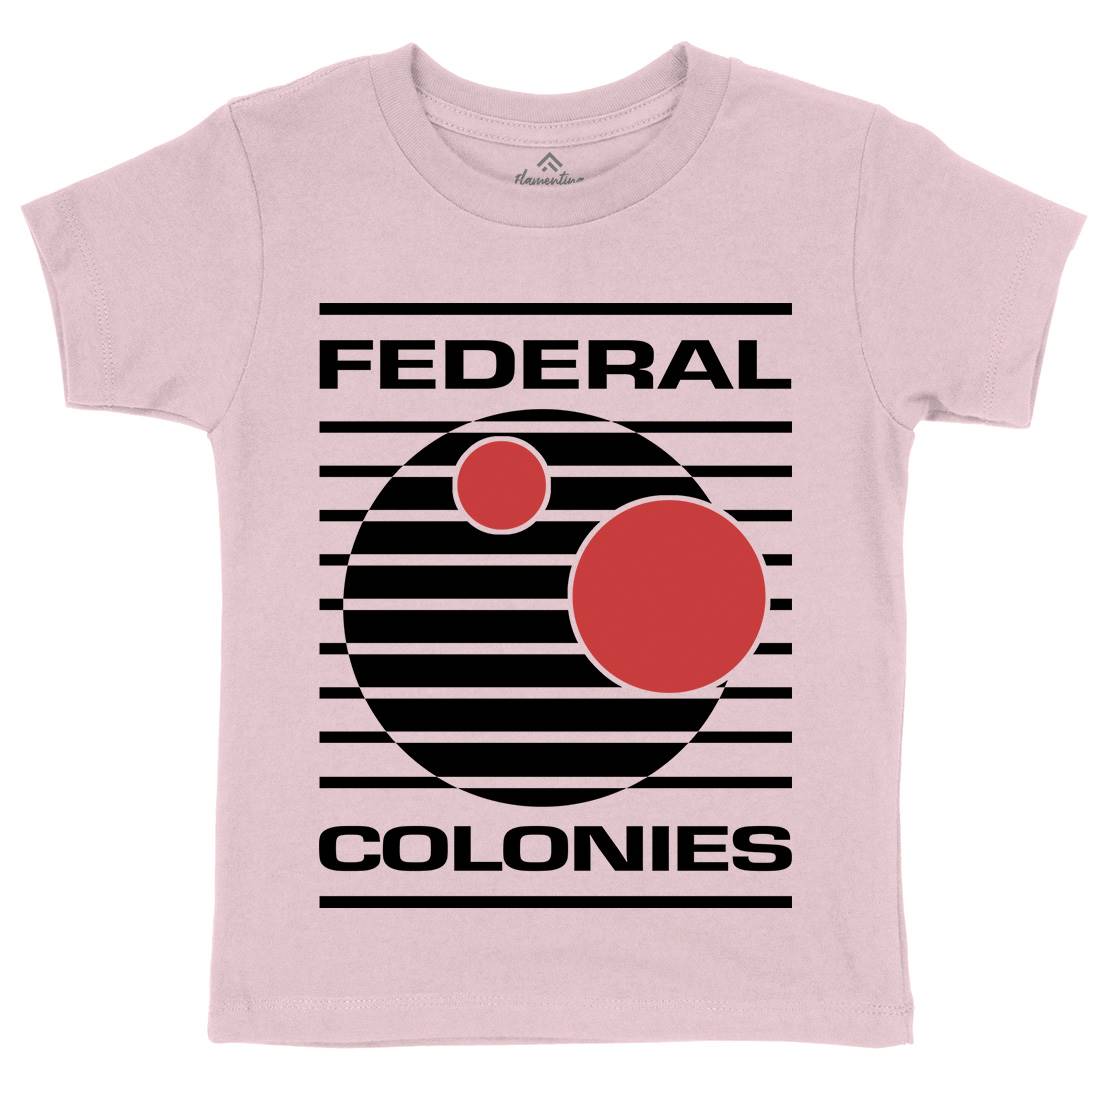 Federal Colonies Kids Crew Neck T-Shirt Space D409